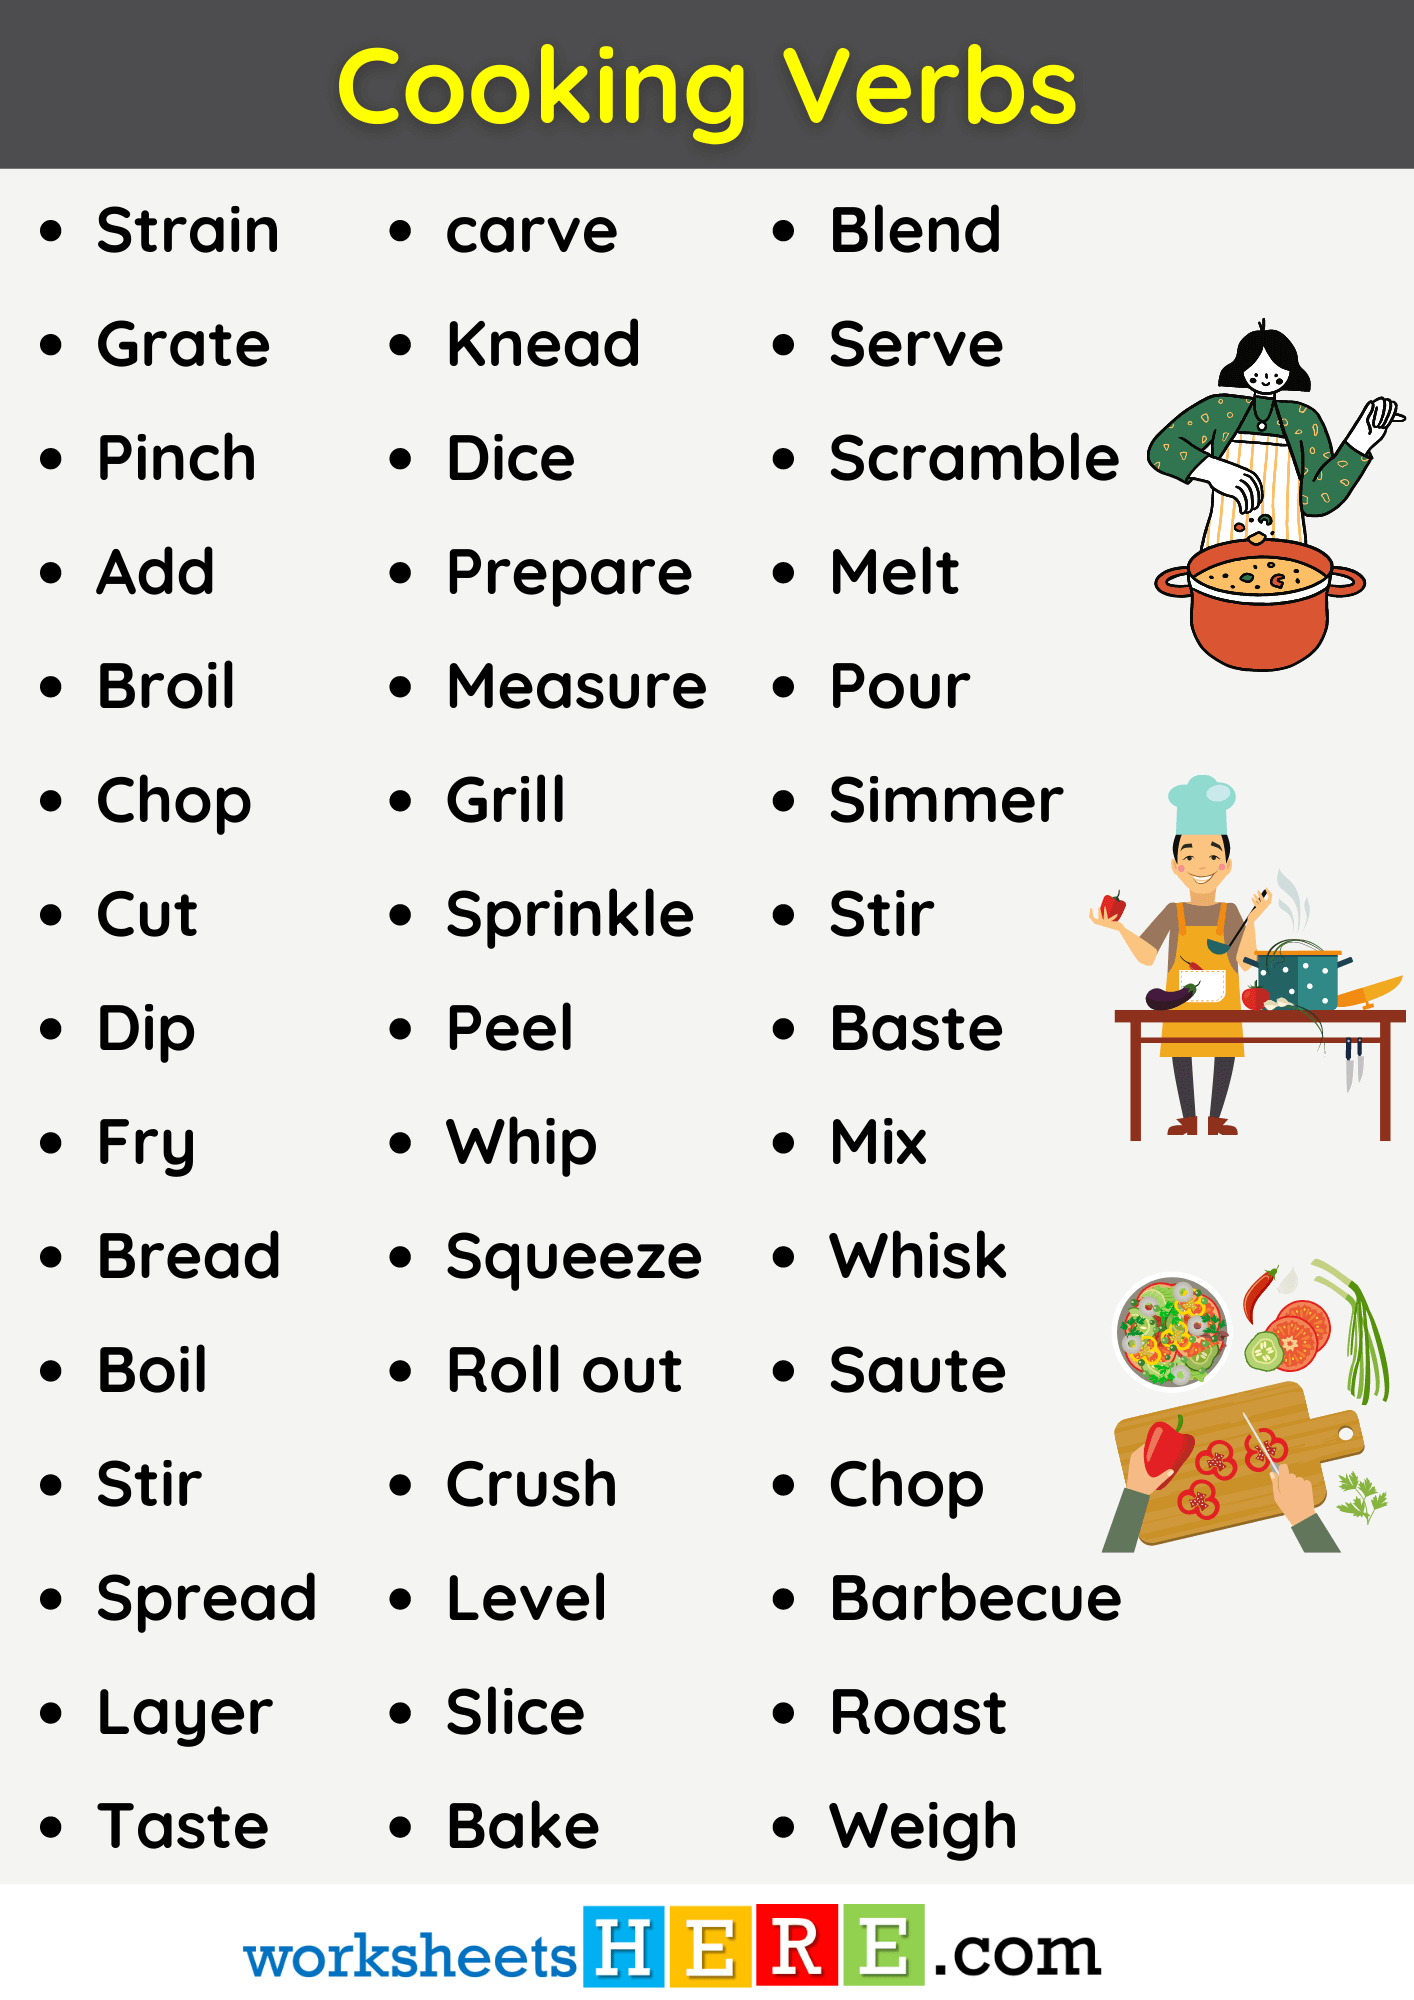 Cooking Verbs Vocabulary List PDF Workhseet For Students and Kids